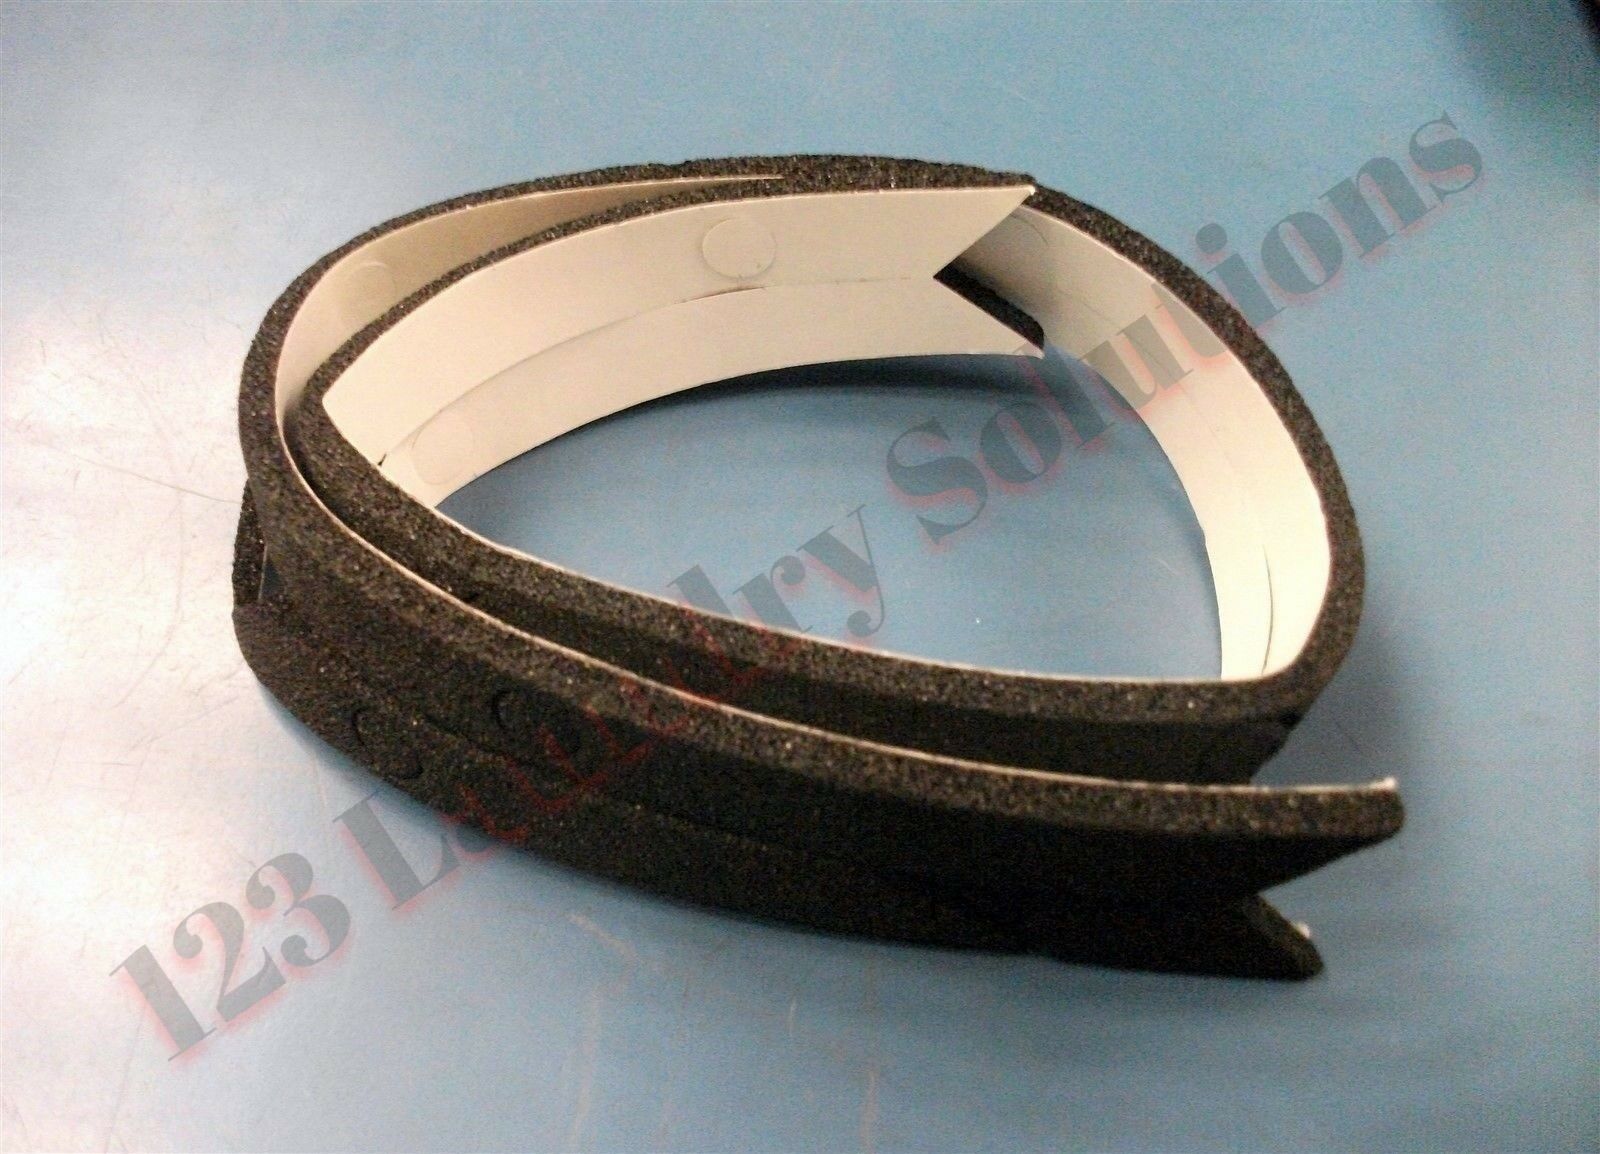 NEW Dryer Gasket Lint Drawer for Speed Queen P/N: 70117901 70117901P [IH] ~ - $4.94